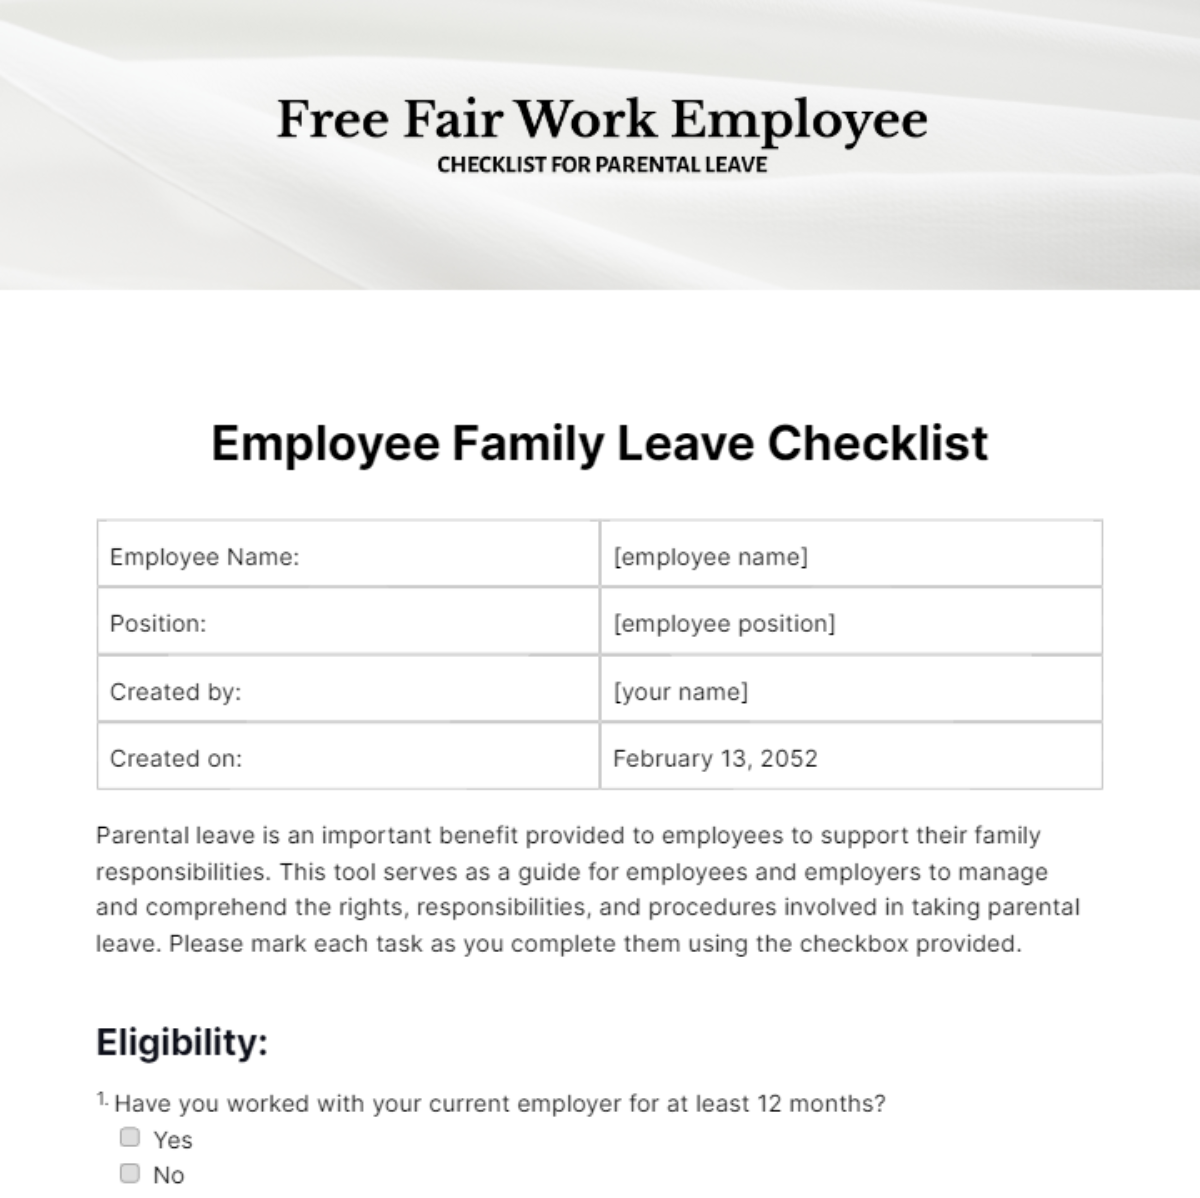 Free Fair Work Employee Checklist for Parental Leave Template